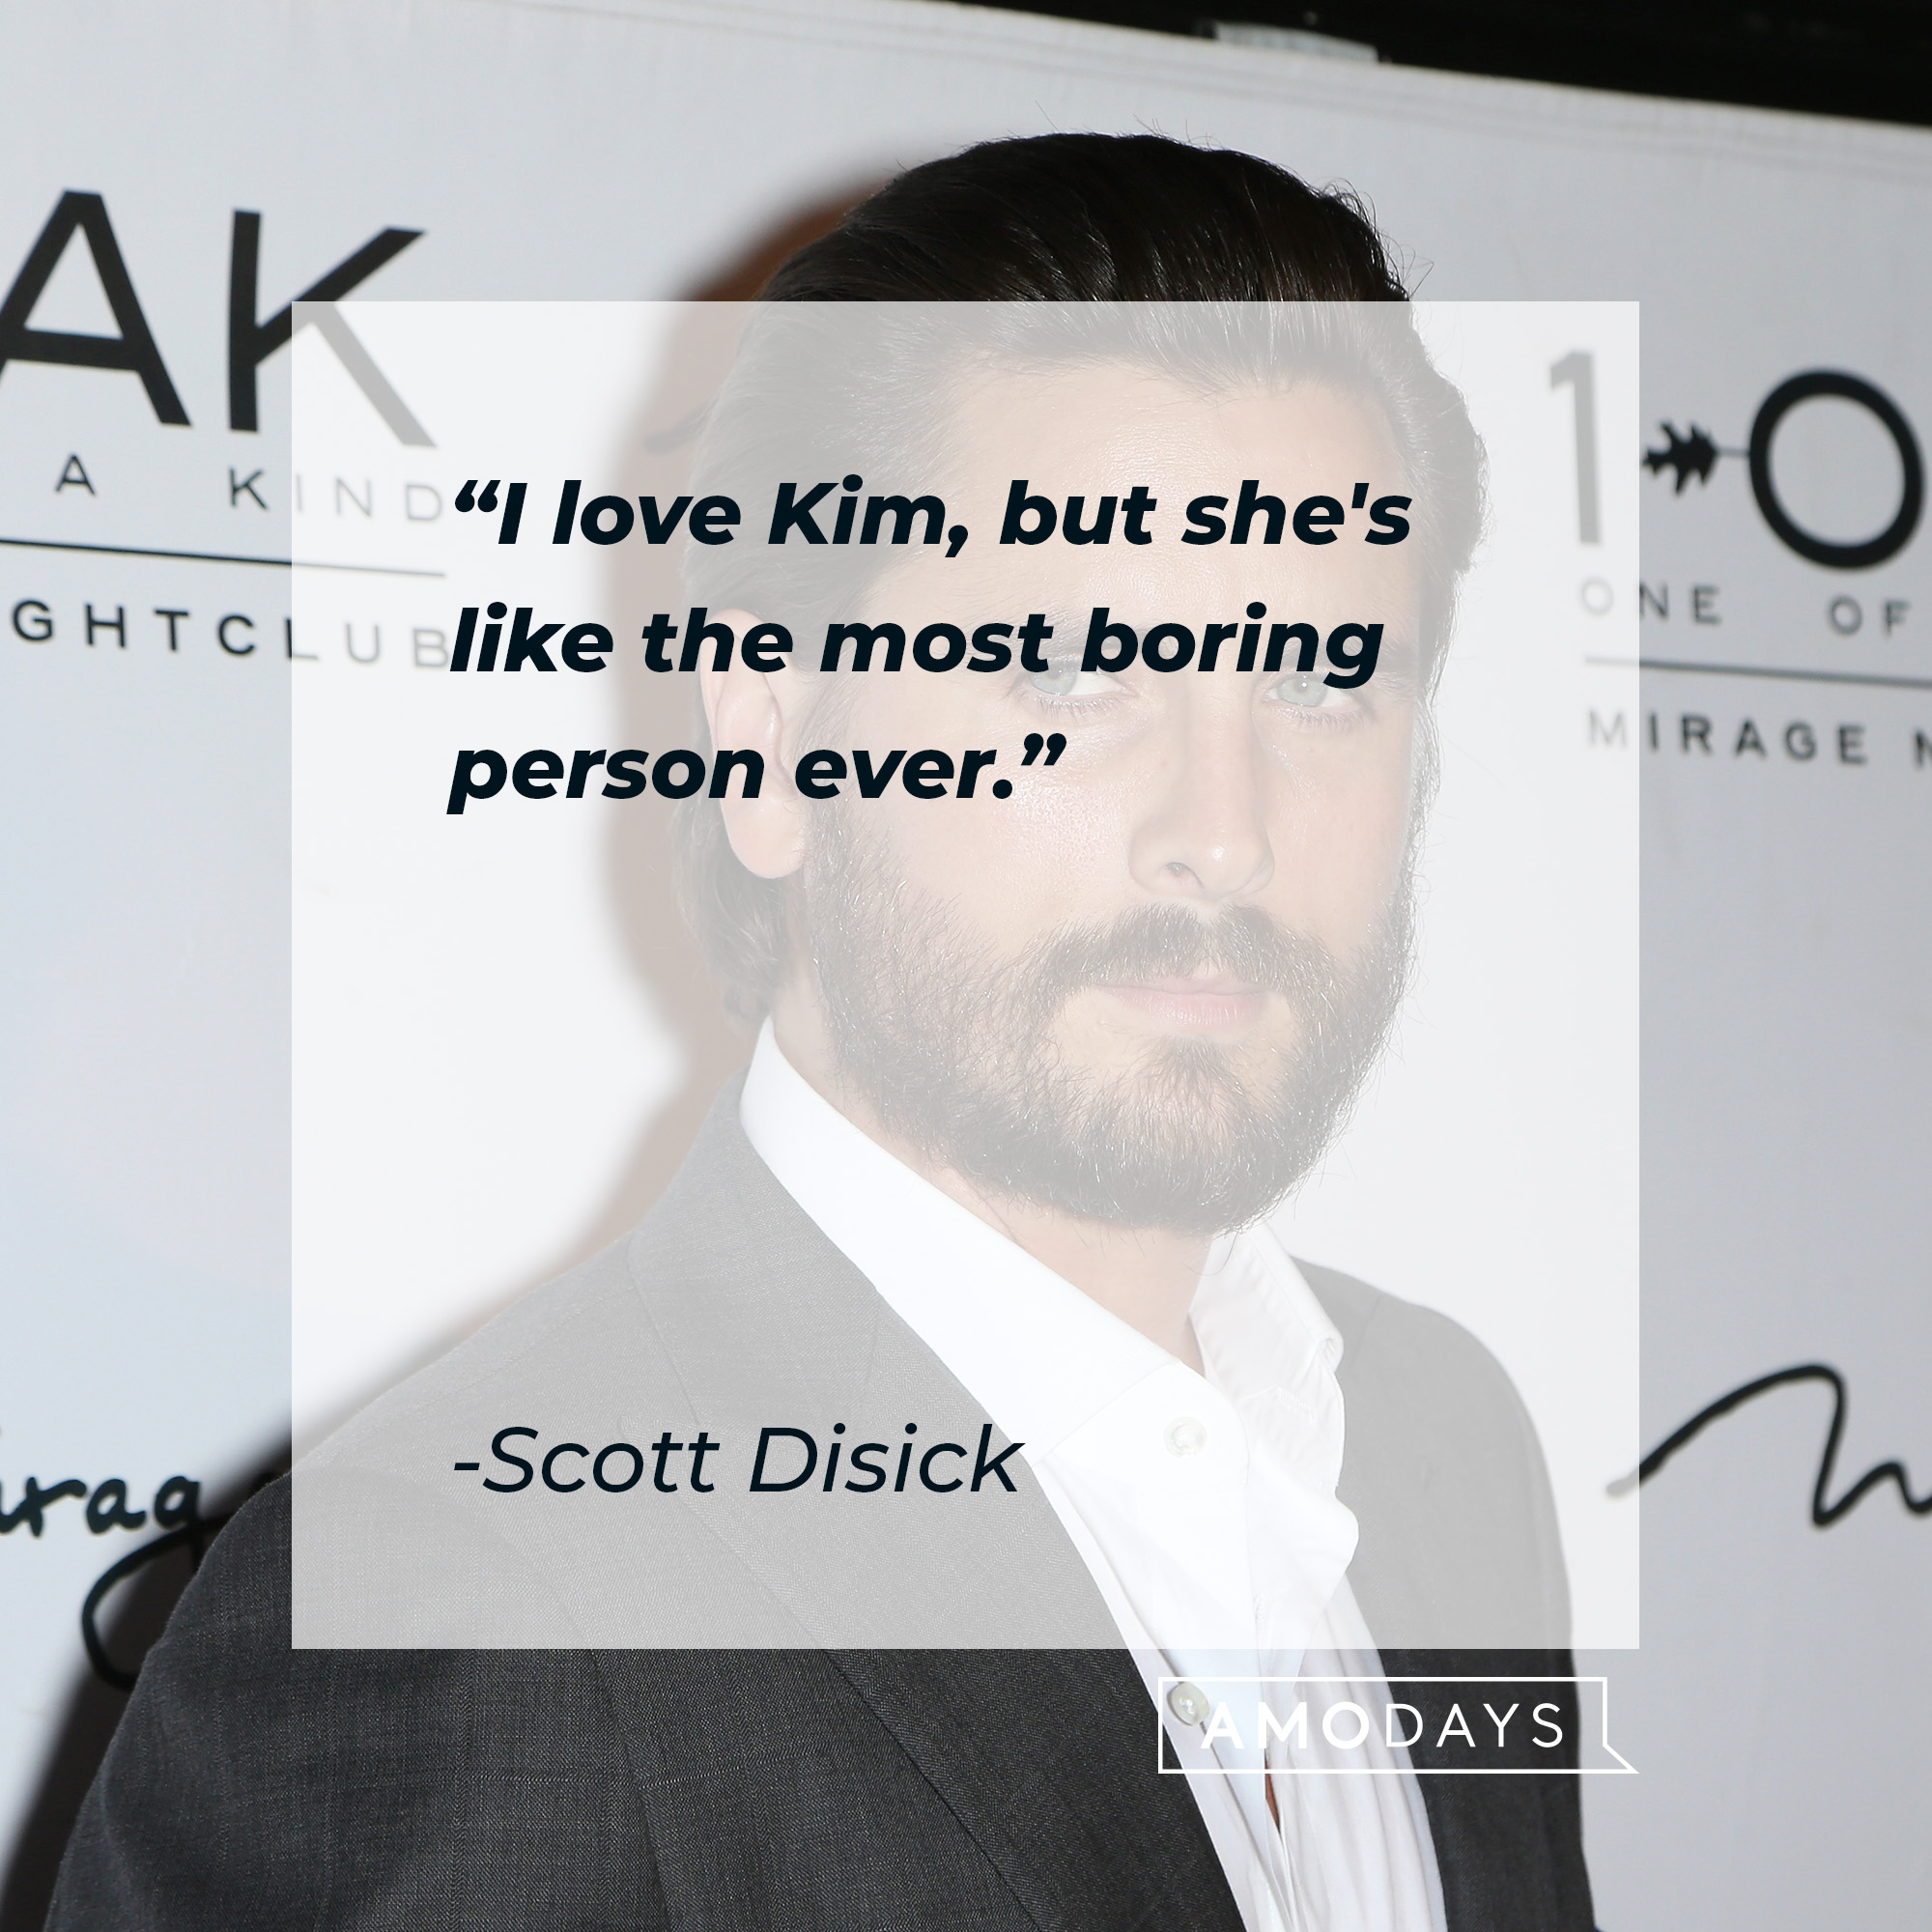 Scott Disick quote: "I love Kim, but she's like the most boring person ever." | Source: Getty Images